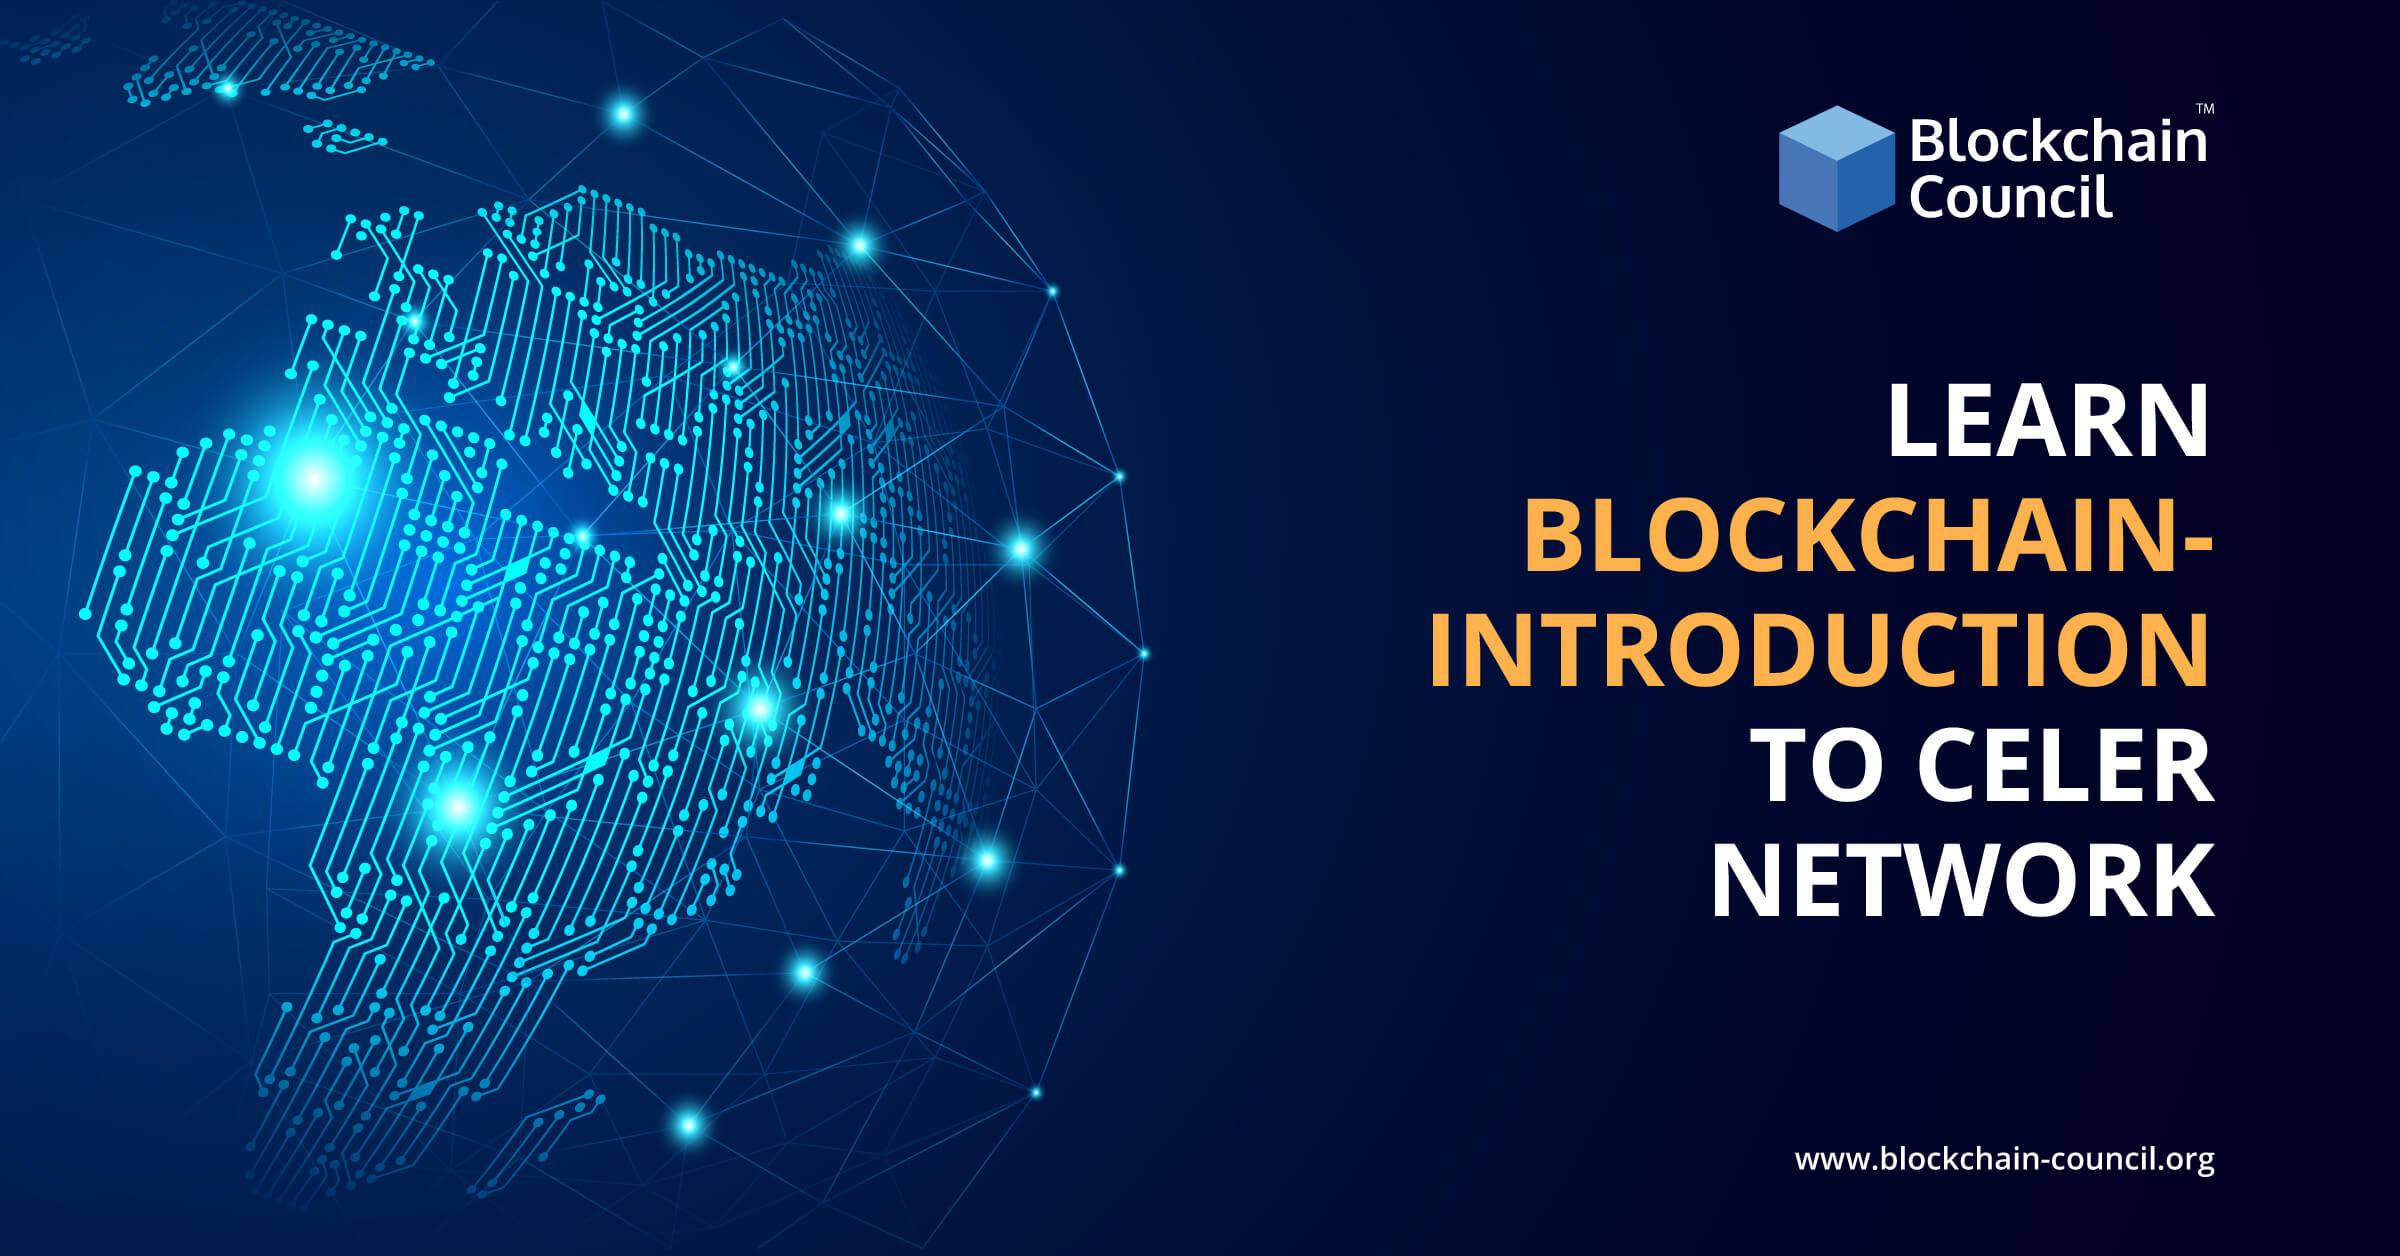 Learn Blockchain- Introduction to Celer Network